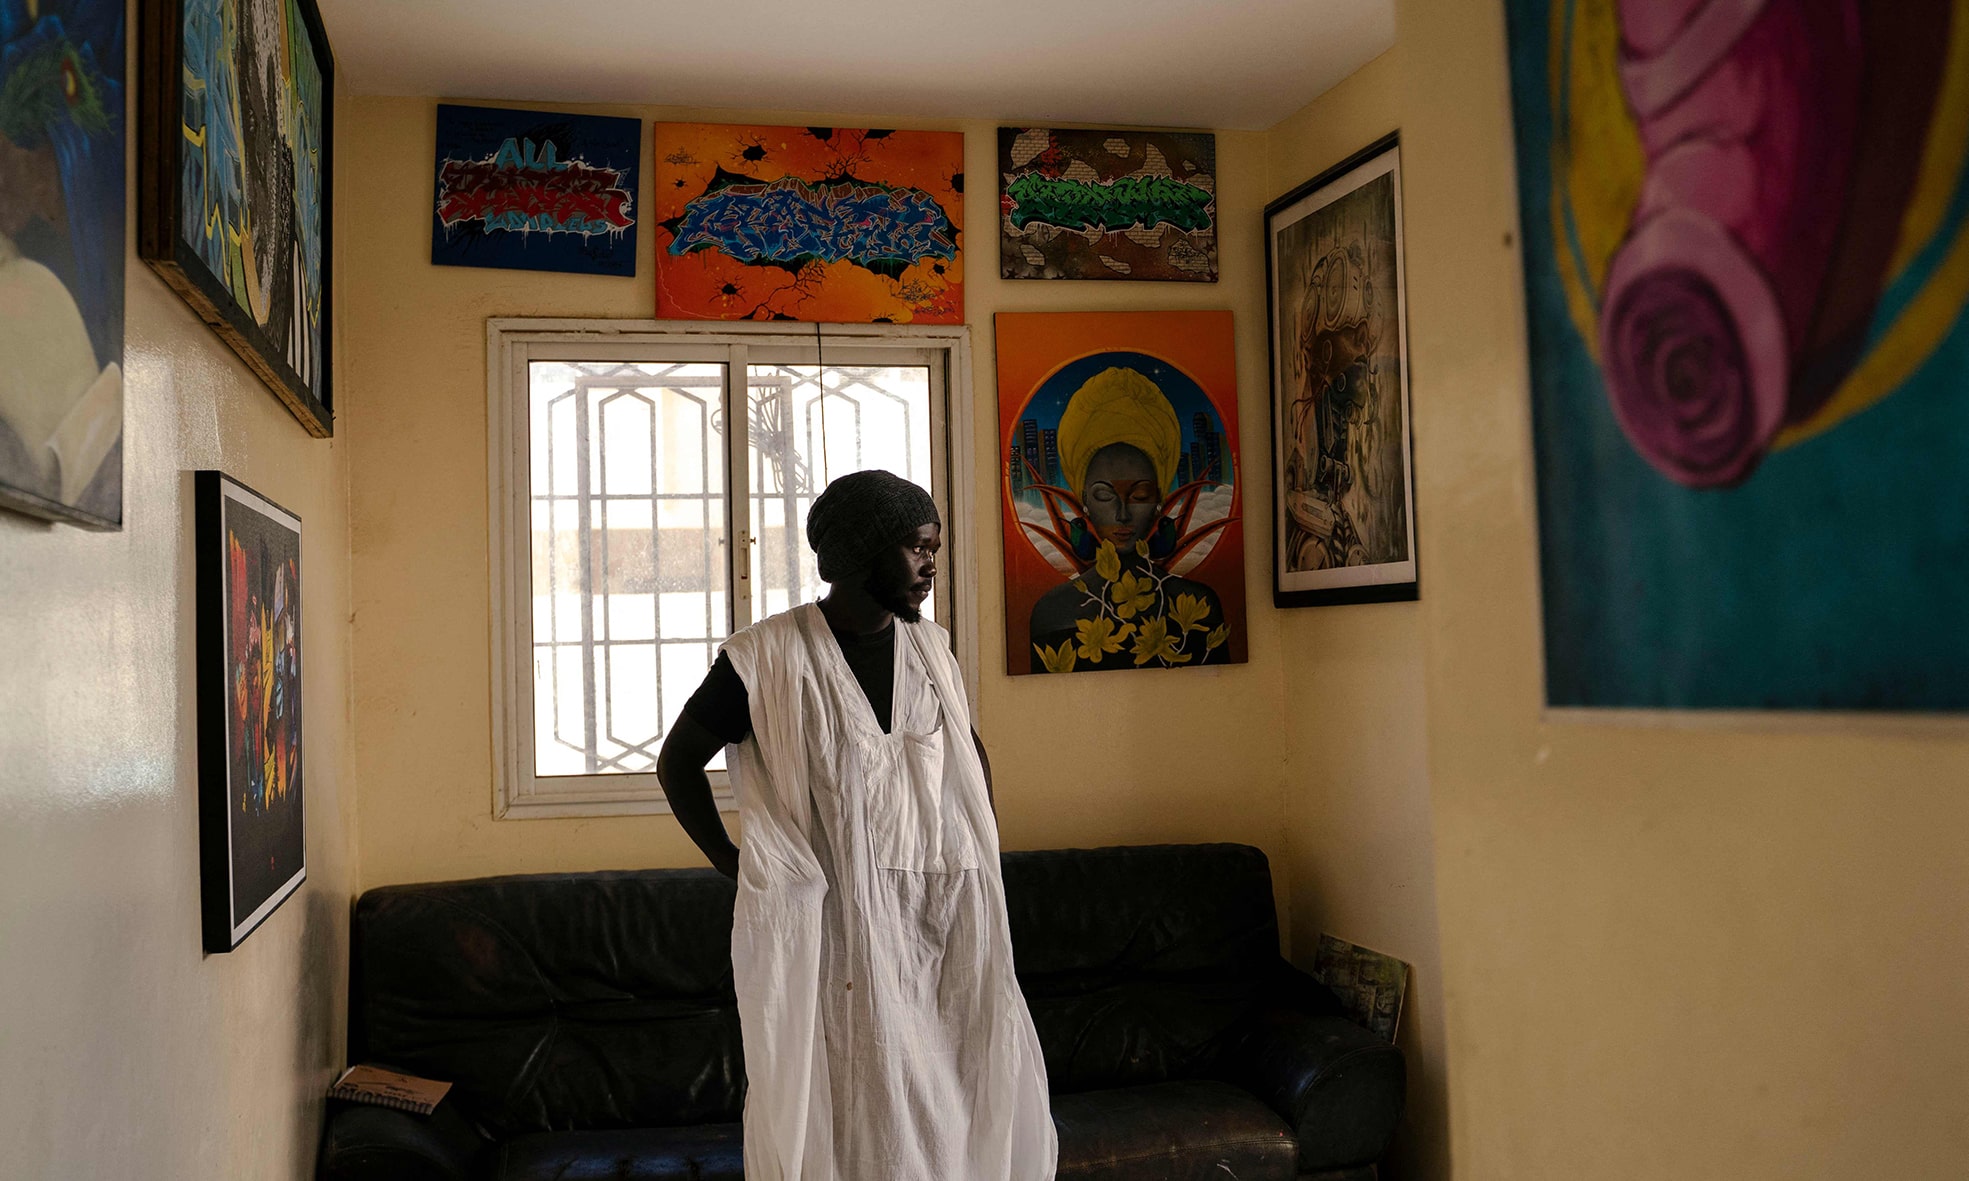 Cherif Tahir Diop poses surrounded by paintings in the hallway of RBS Akademya.